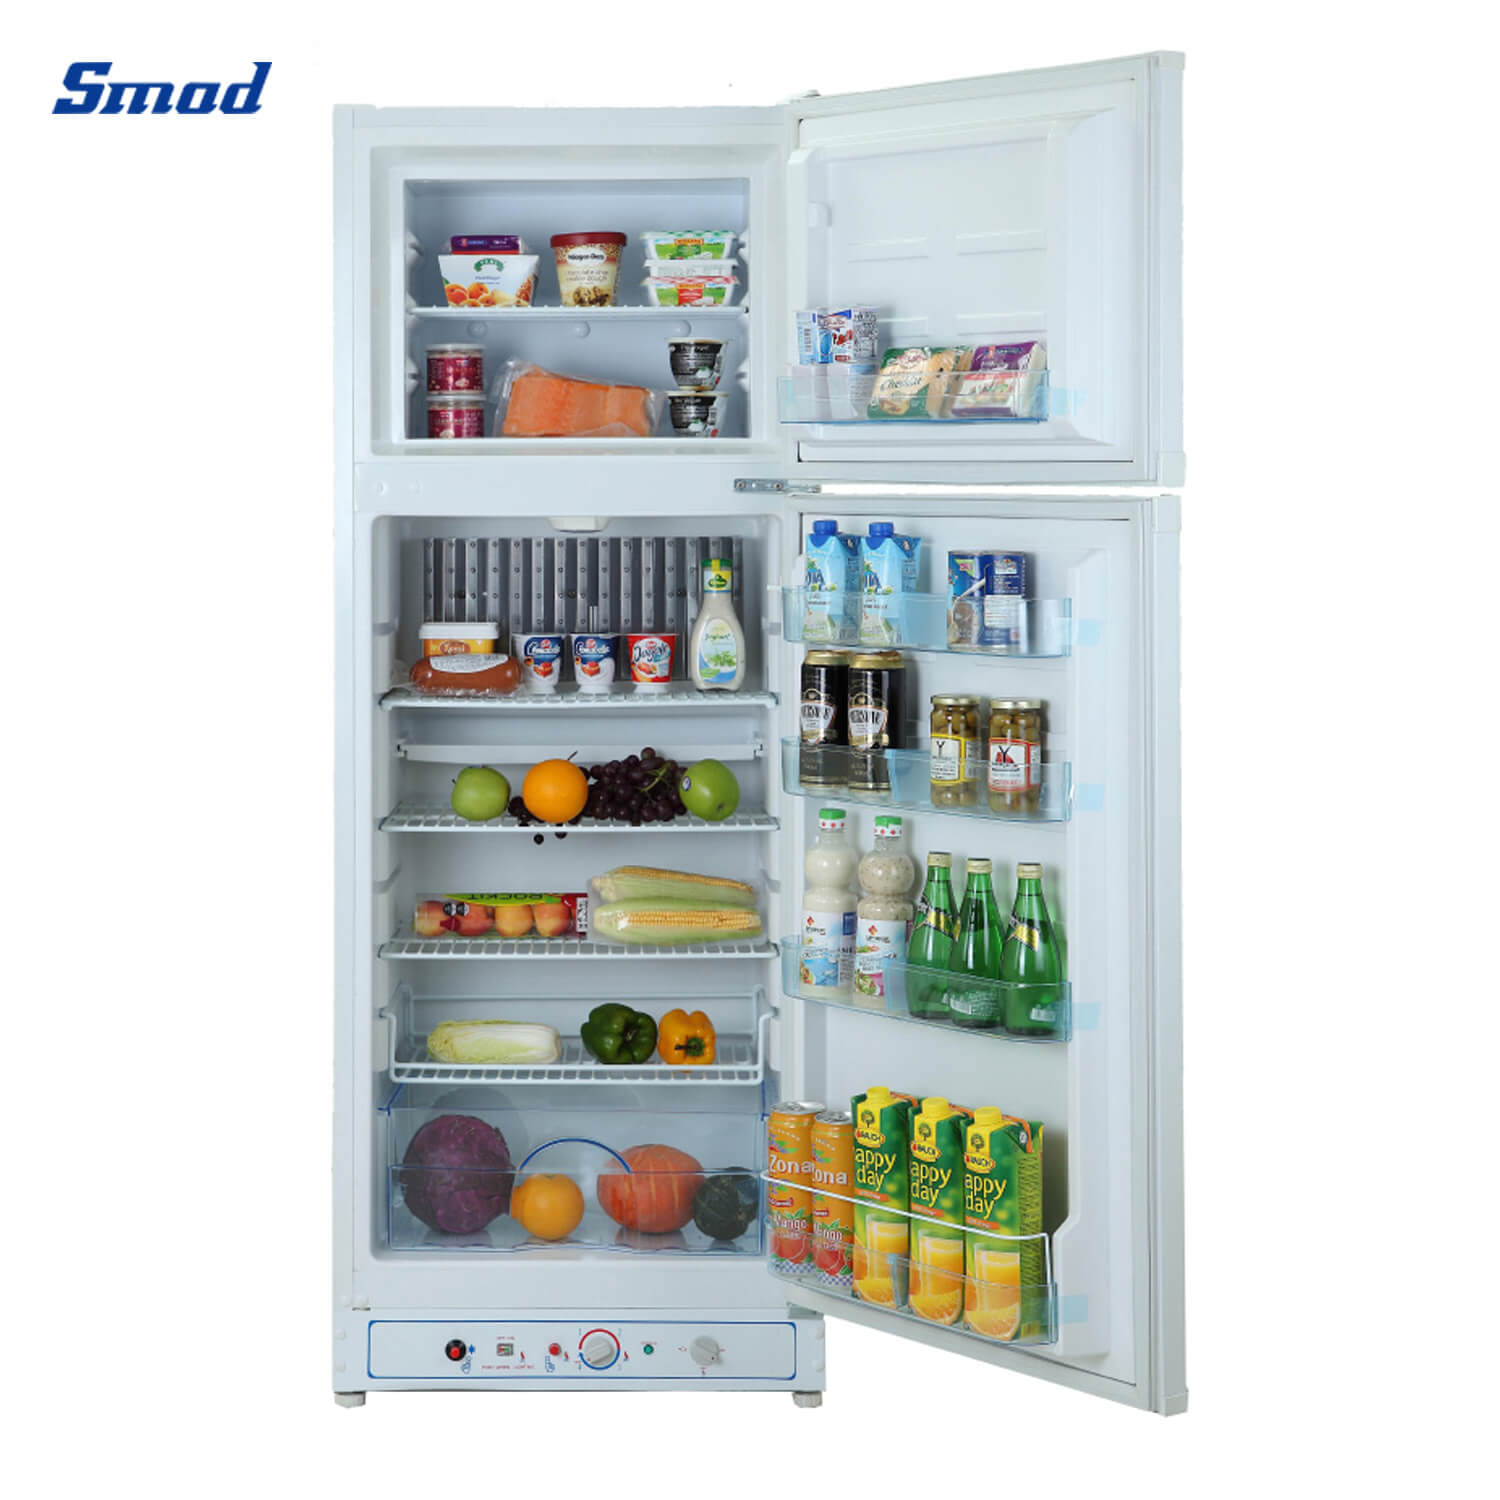 Smad 7.9 Cu. Ft. Double Door Gas Absorption Refrigerator with Elegant Structure Design